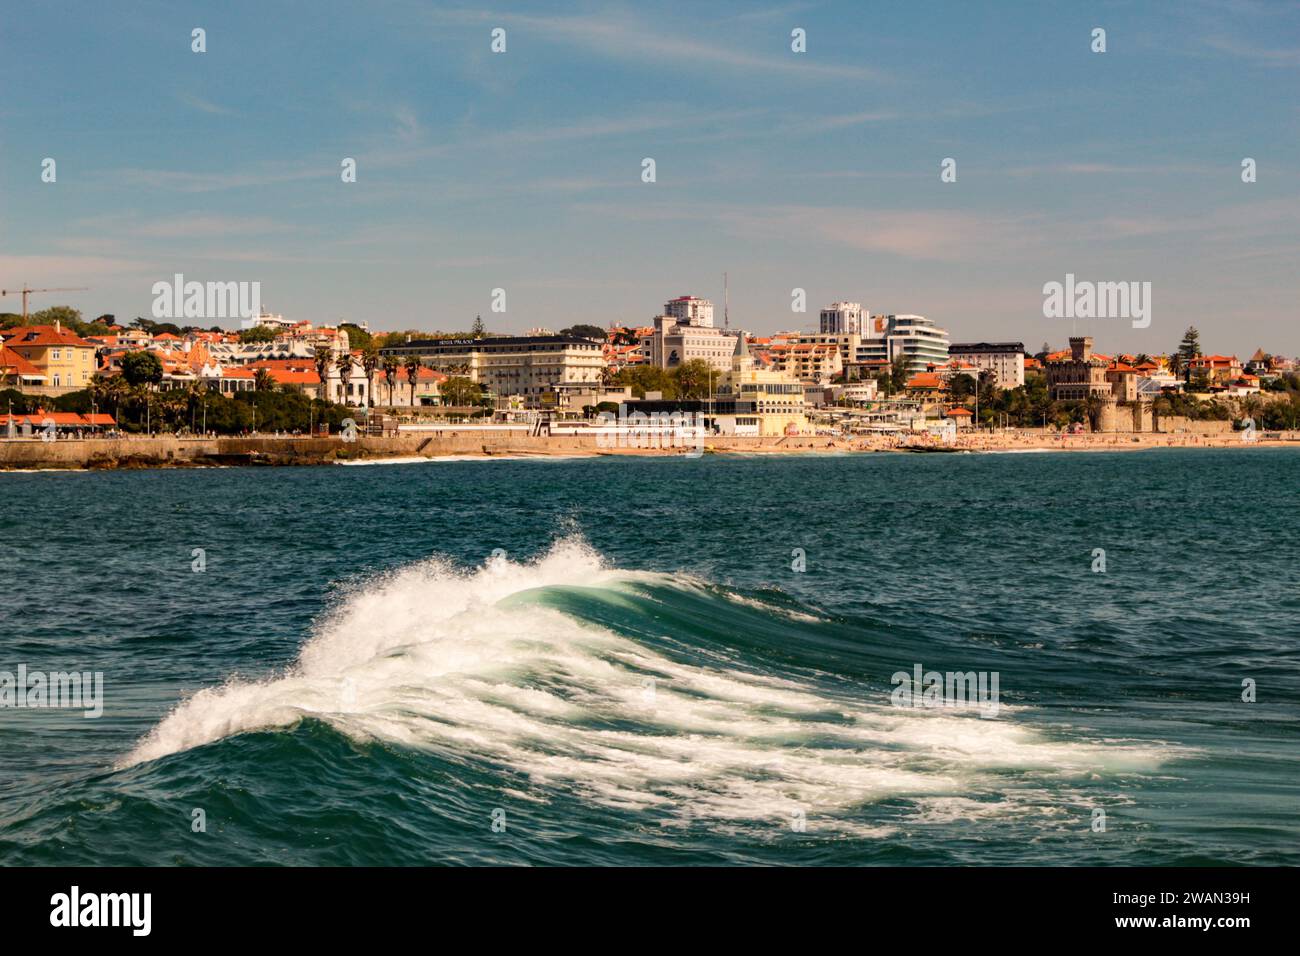 Ocean waves and the city of Estoril Portugal in the background Stock Photo